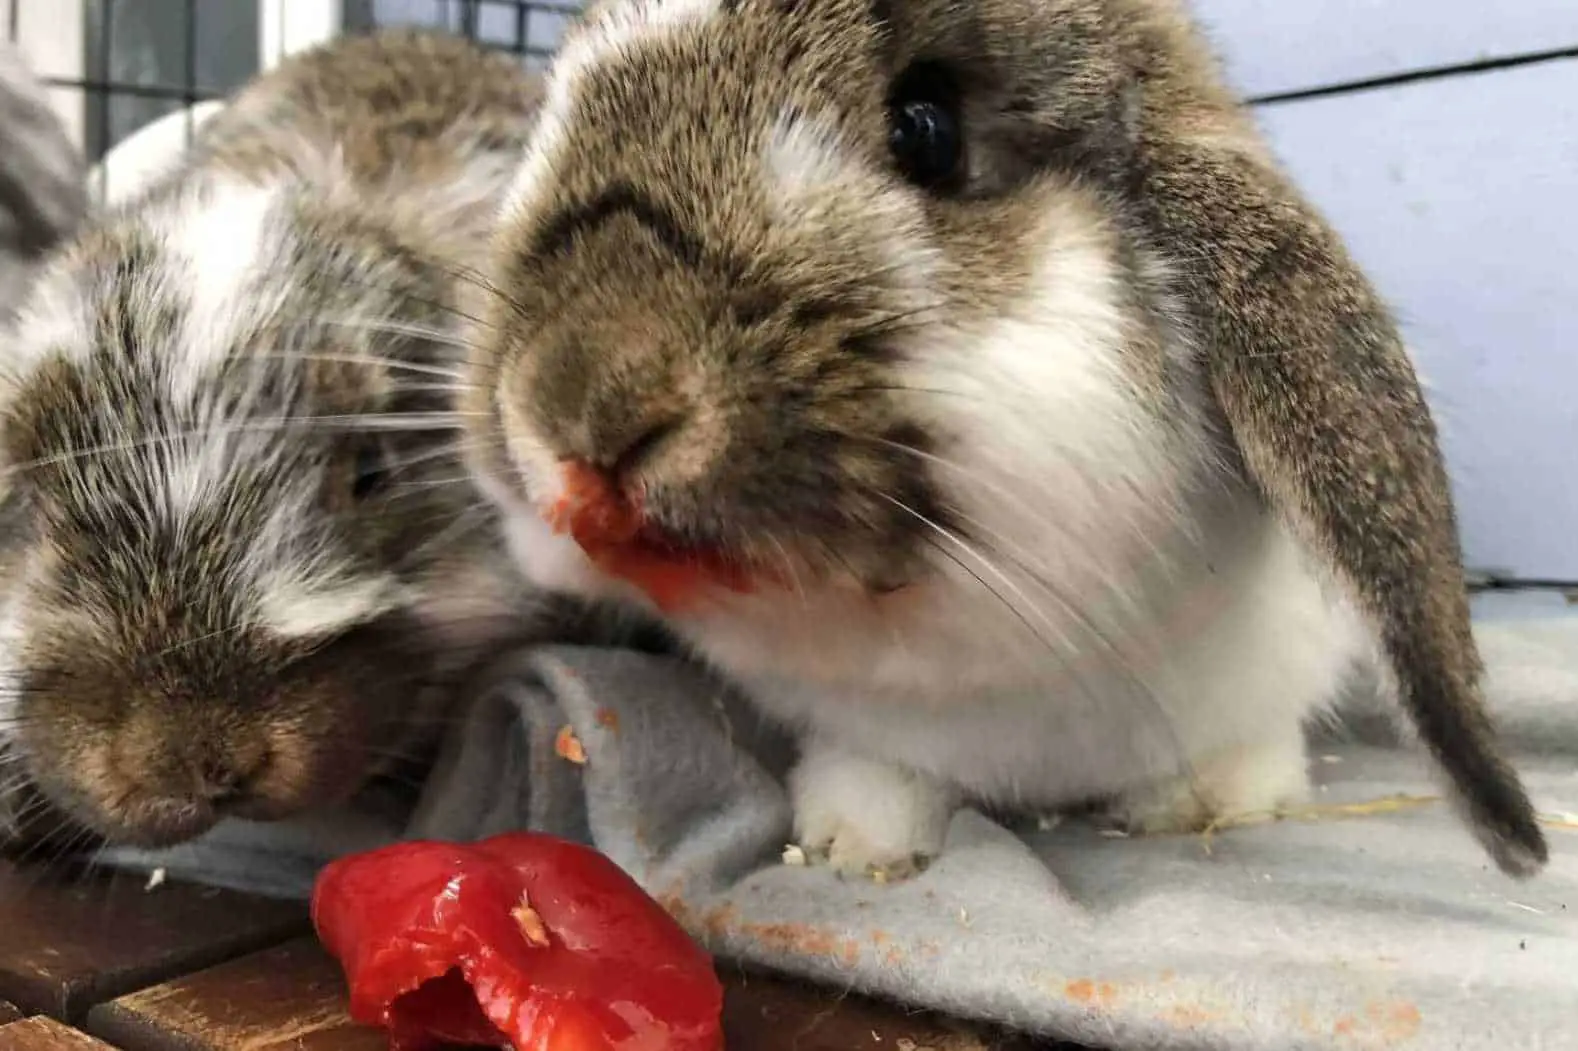 can rabbits eat bell pepper